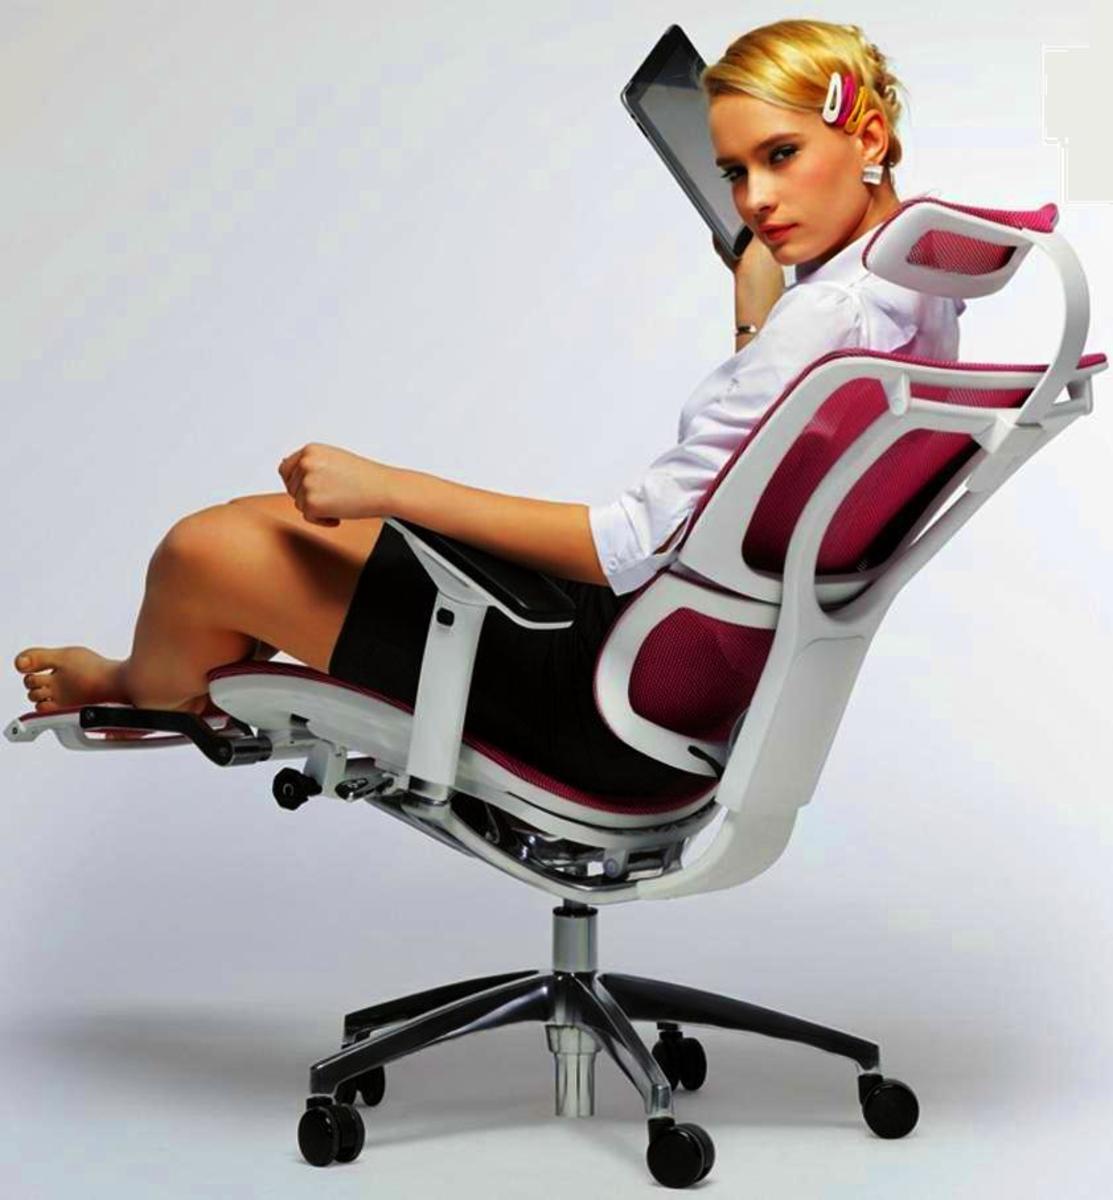 Best Ergonomic Office Chairs 2015 | hubpages